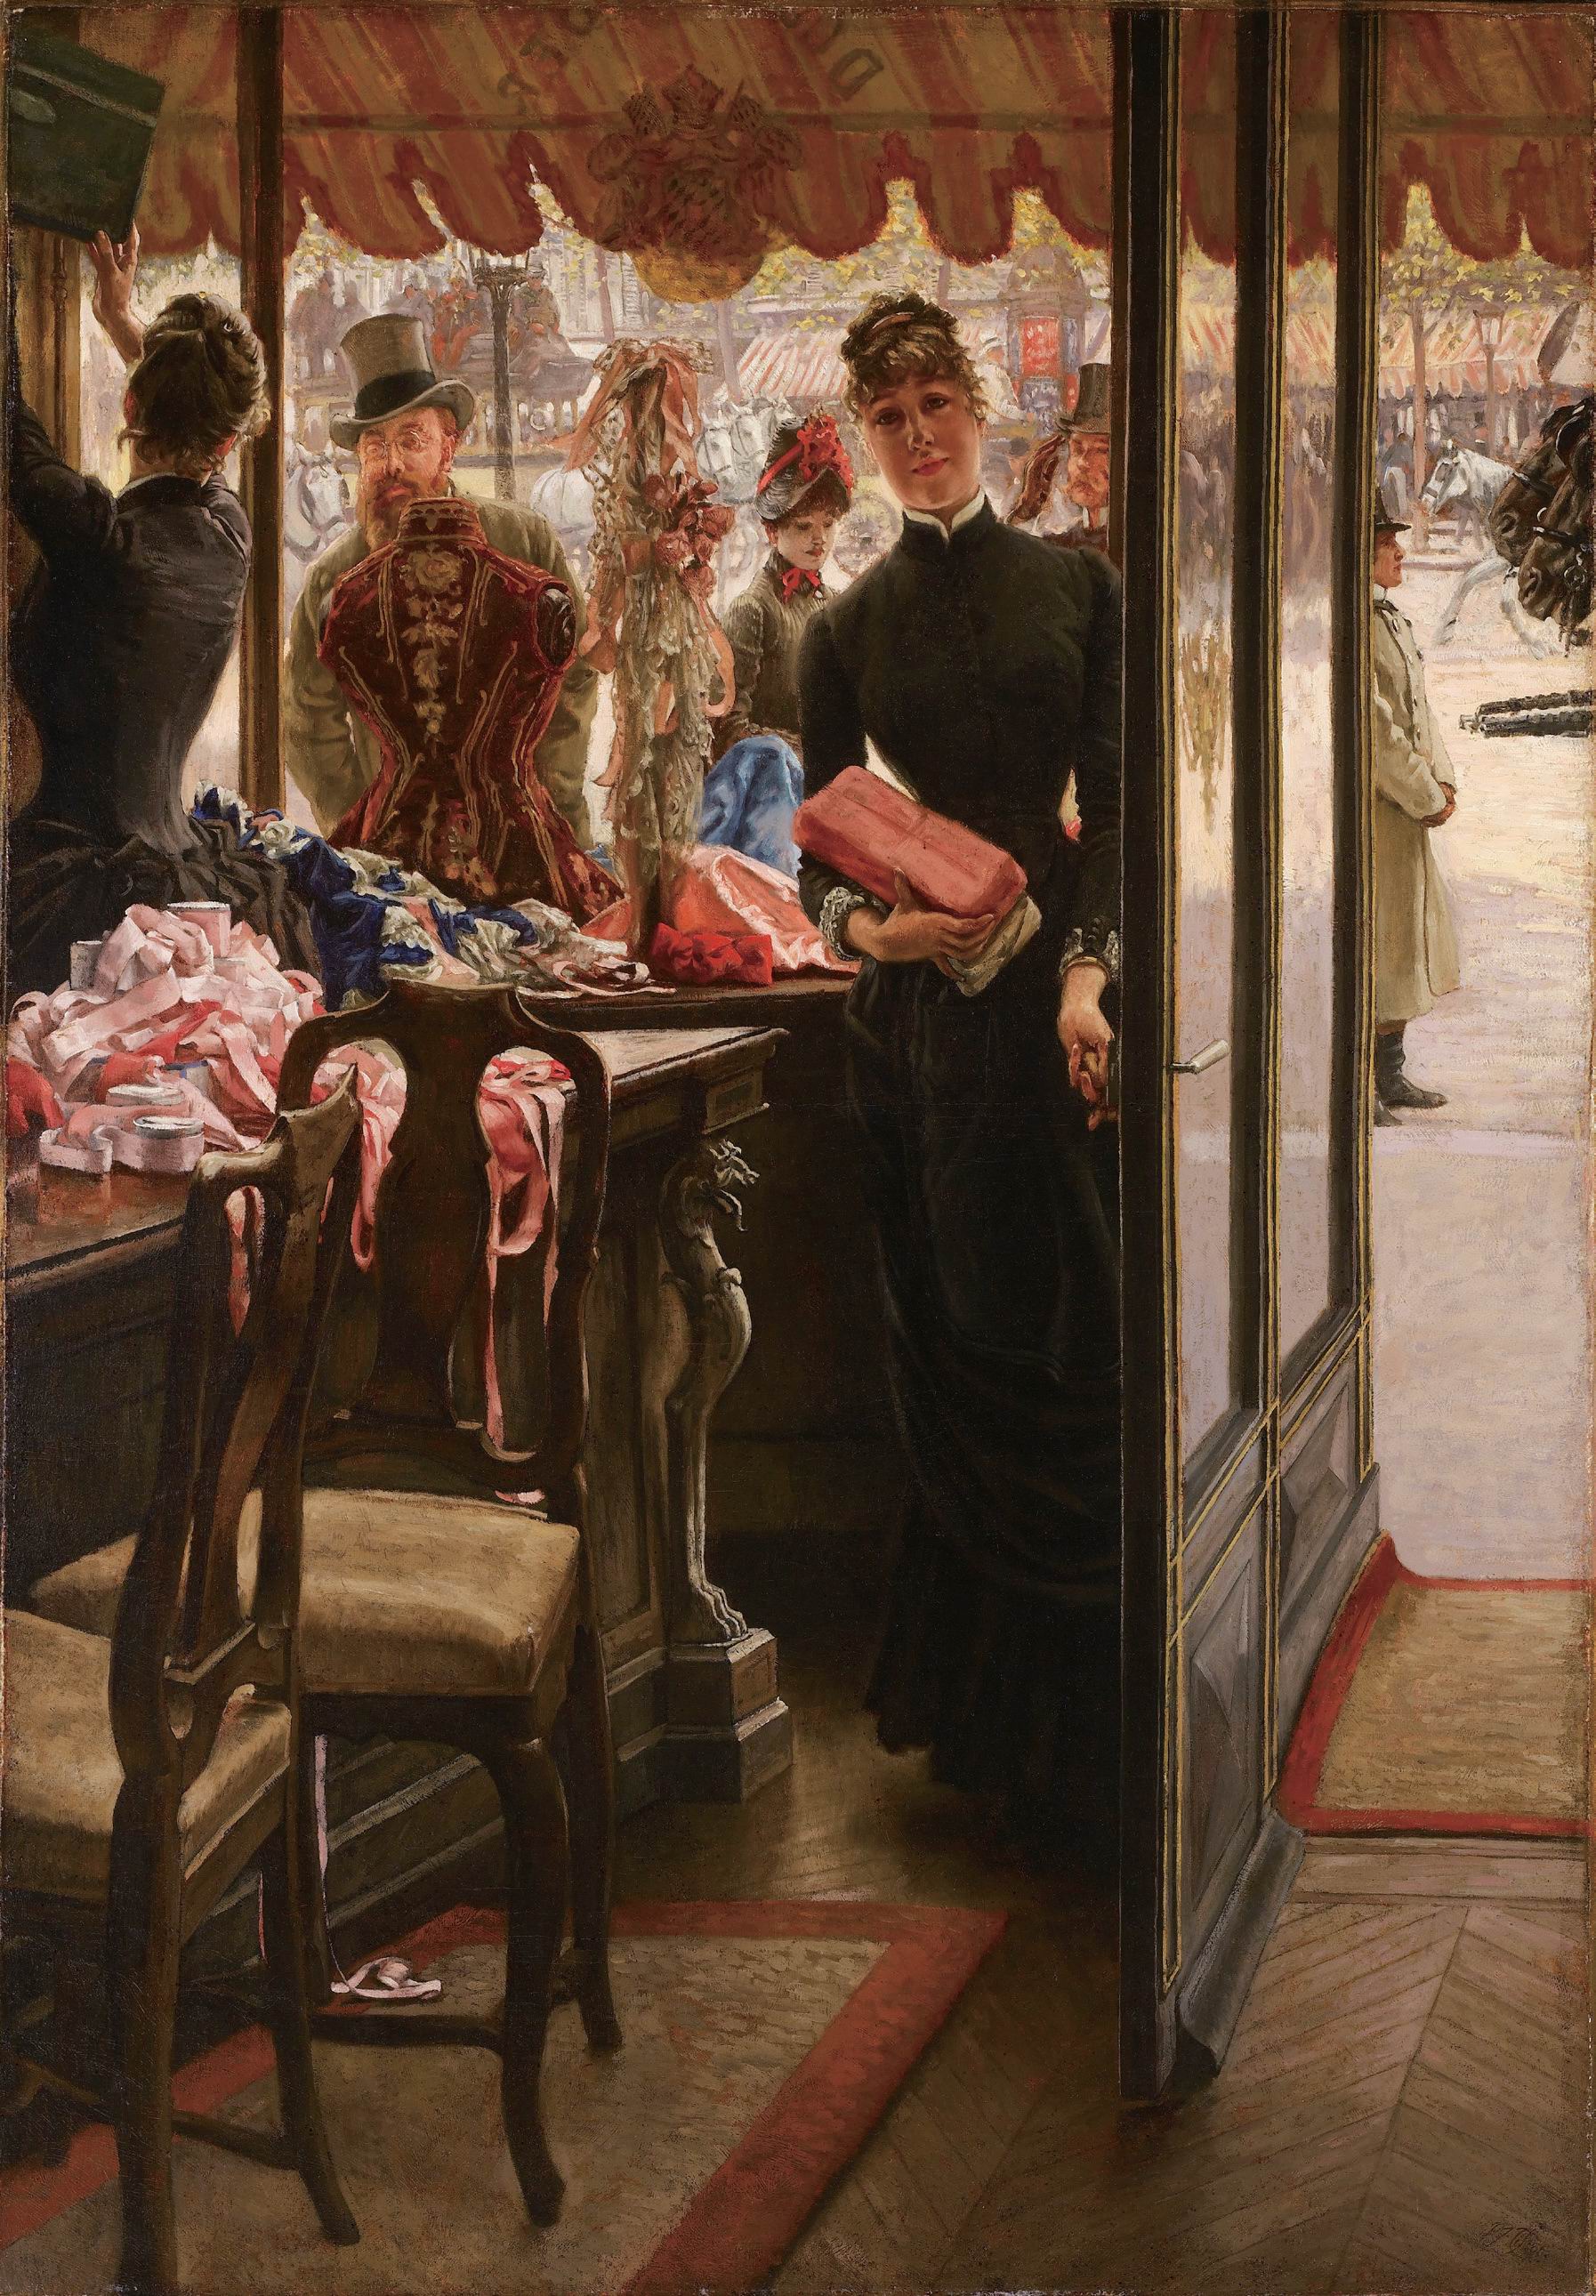 General 1794x2581 Oil on canvas oil painting James Tissot women men looking at viewer hat clothes artwork classic art chair portrait display